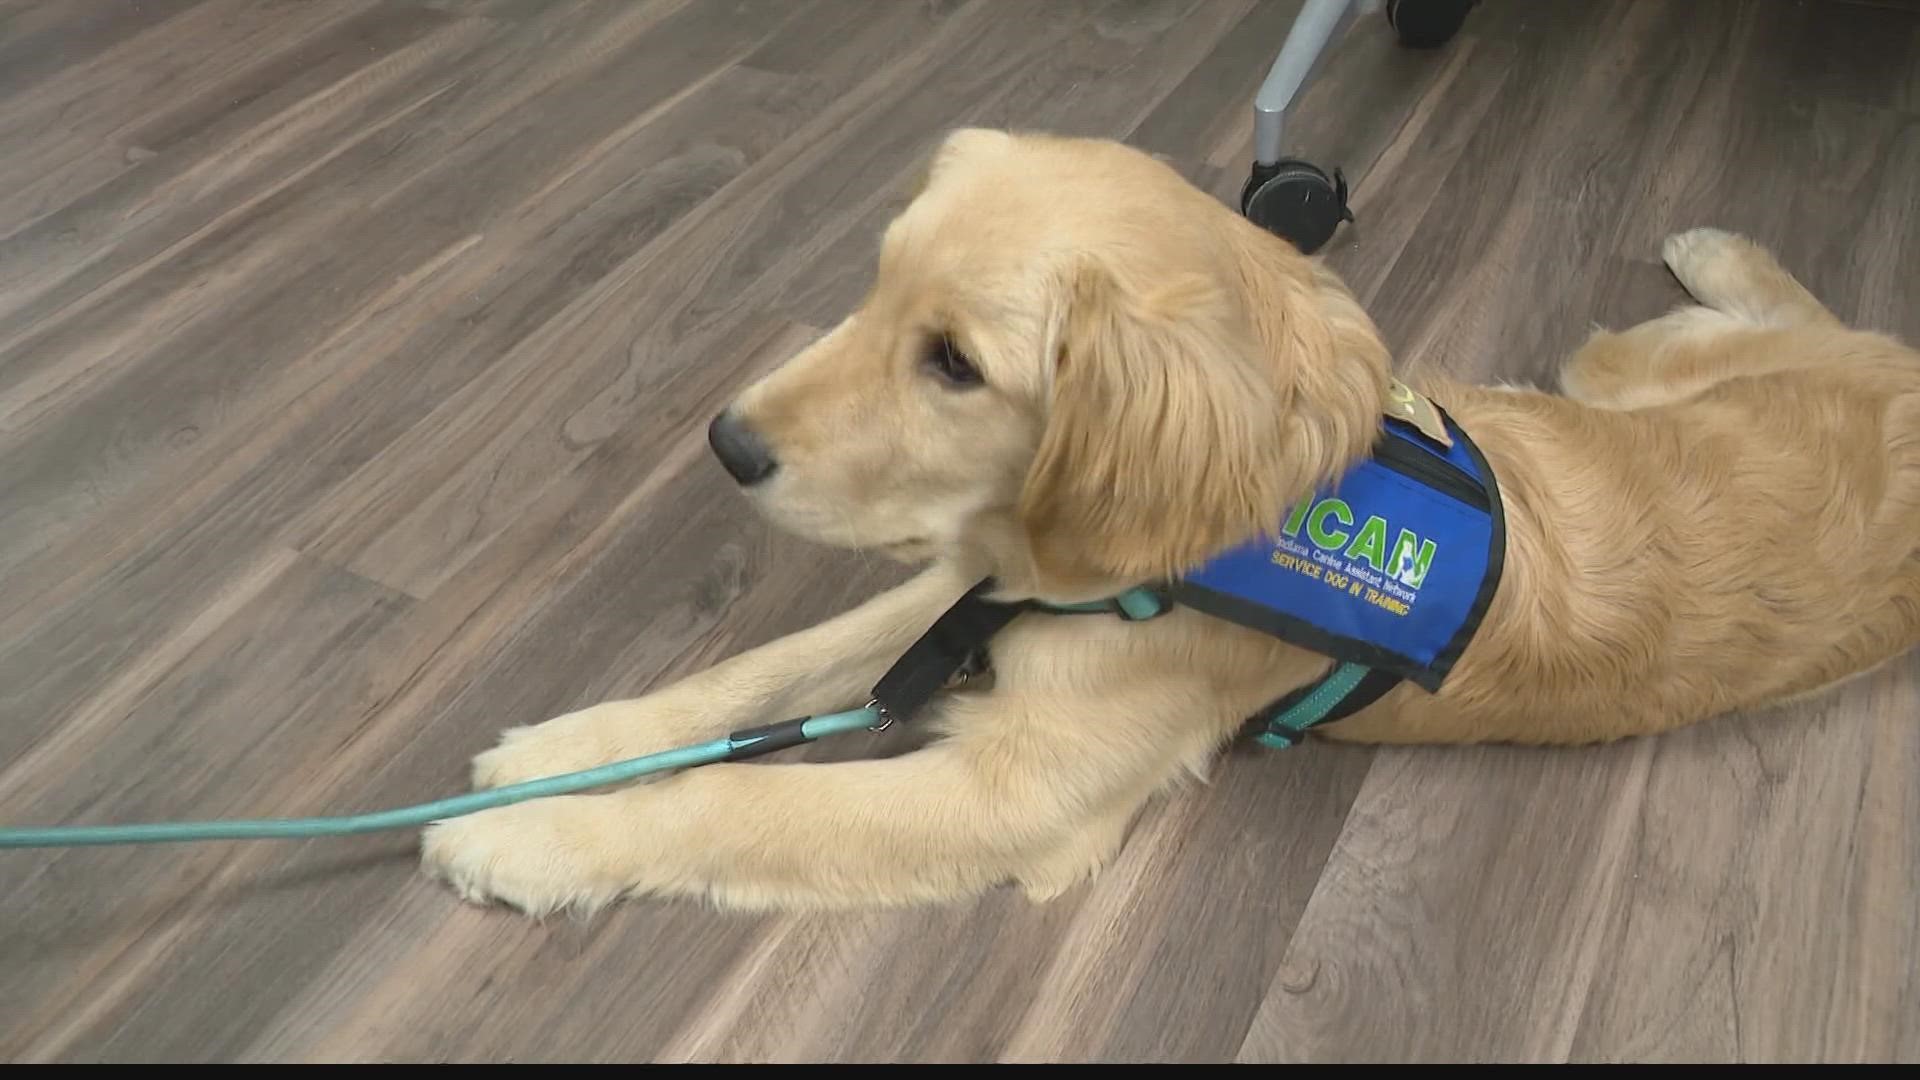 The organization trains assistance dogs for people with disabilities.